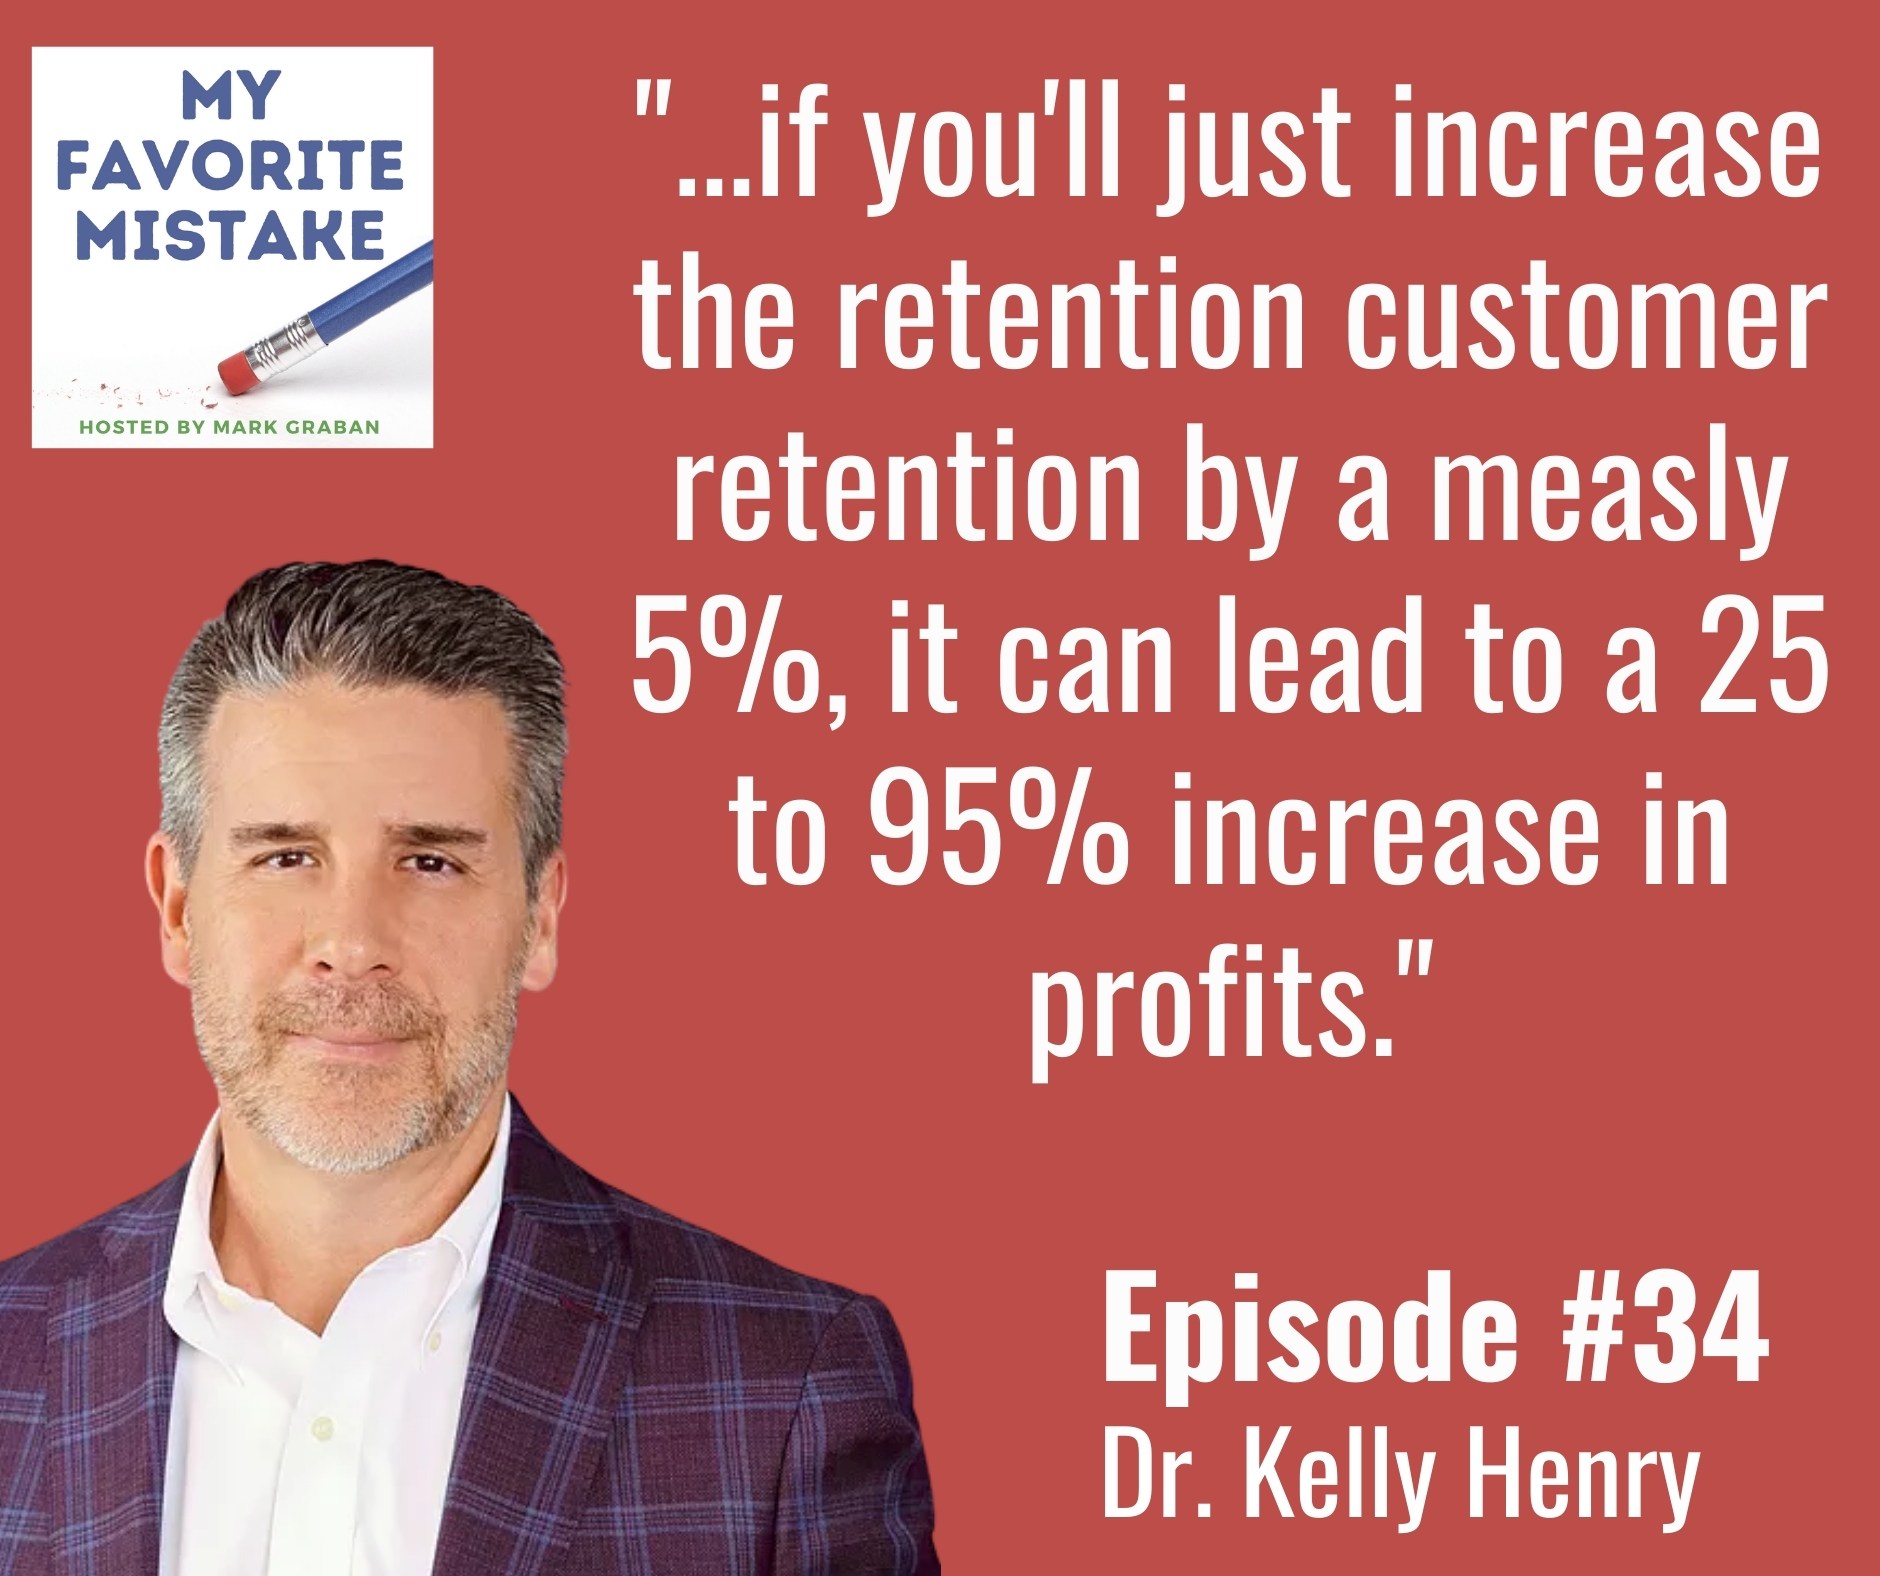 "...if you'll just increase the retention customer retention by a measly 5%, it can lead to a 25 to 95% increase in profits."